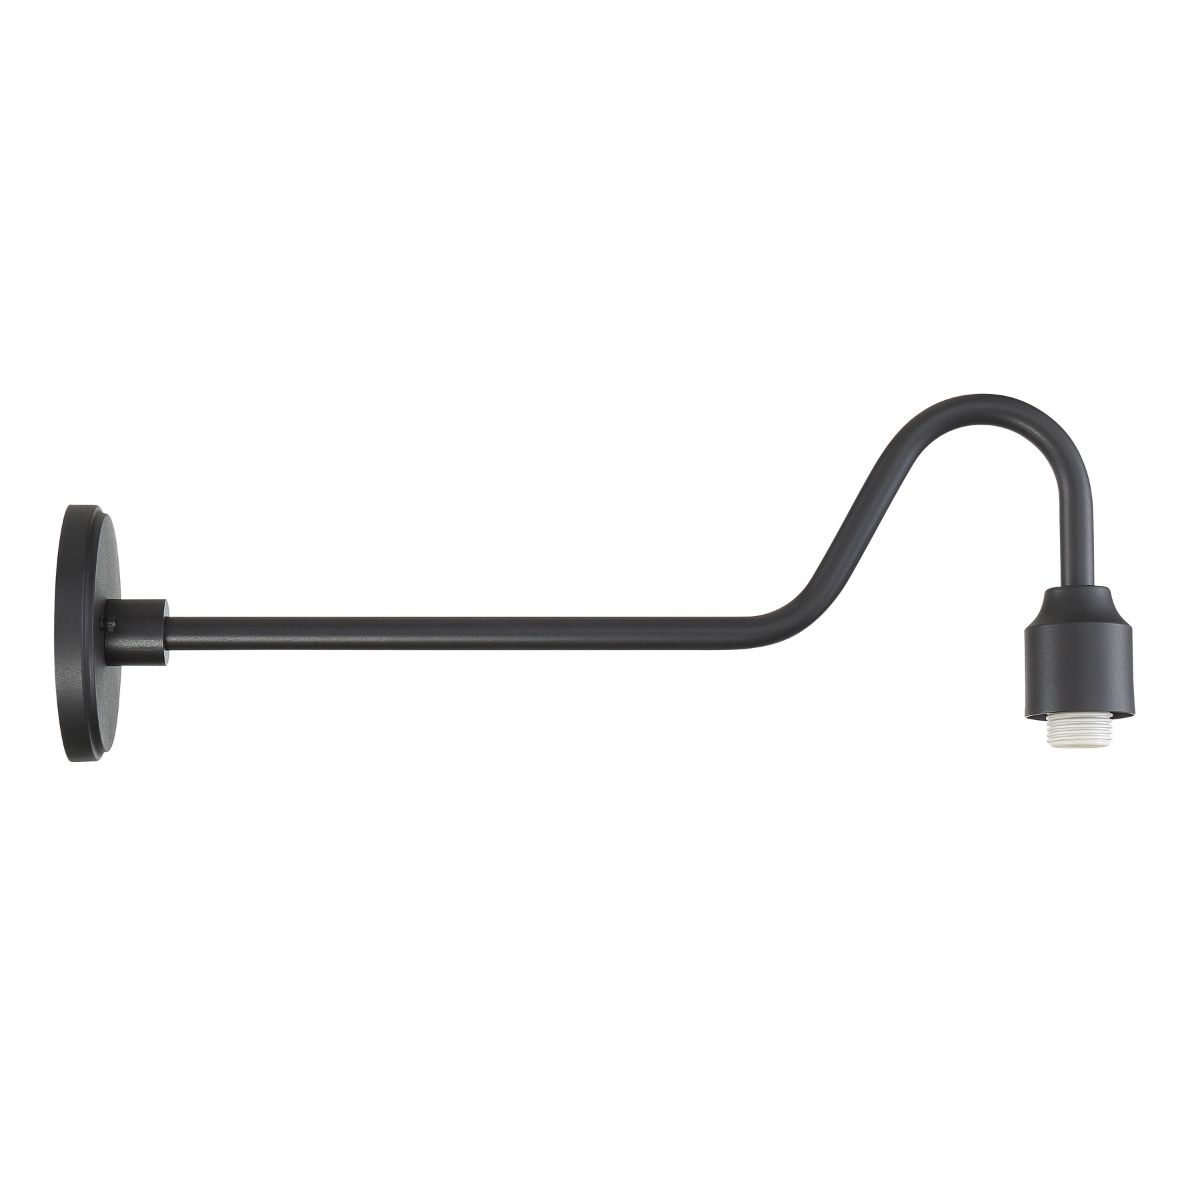 RLM Outdoor Wall Mount 29 In. Curved Arm Black Finish